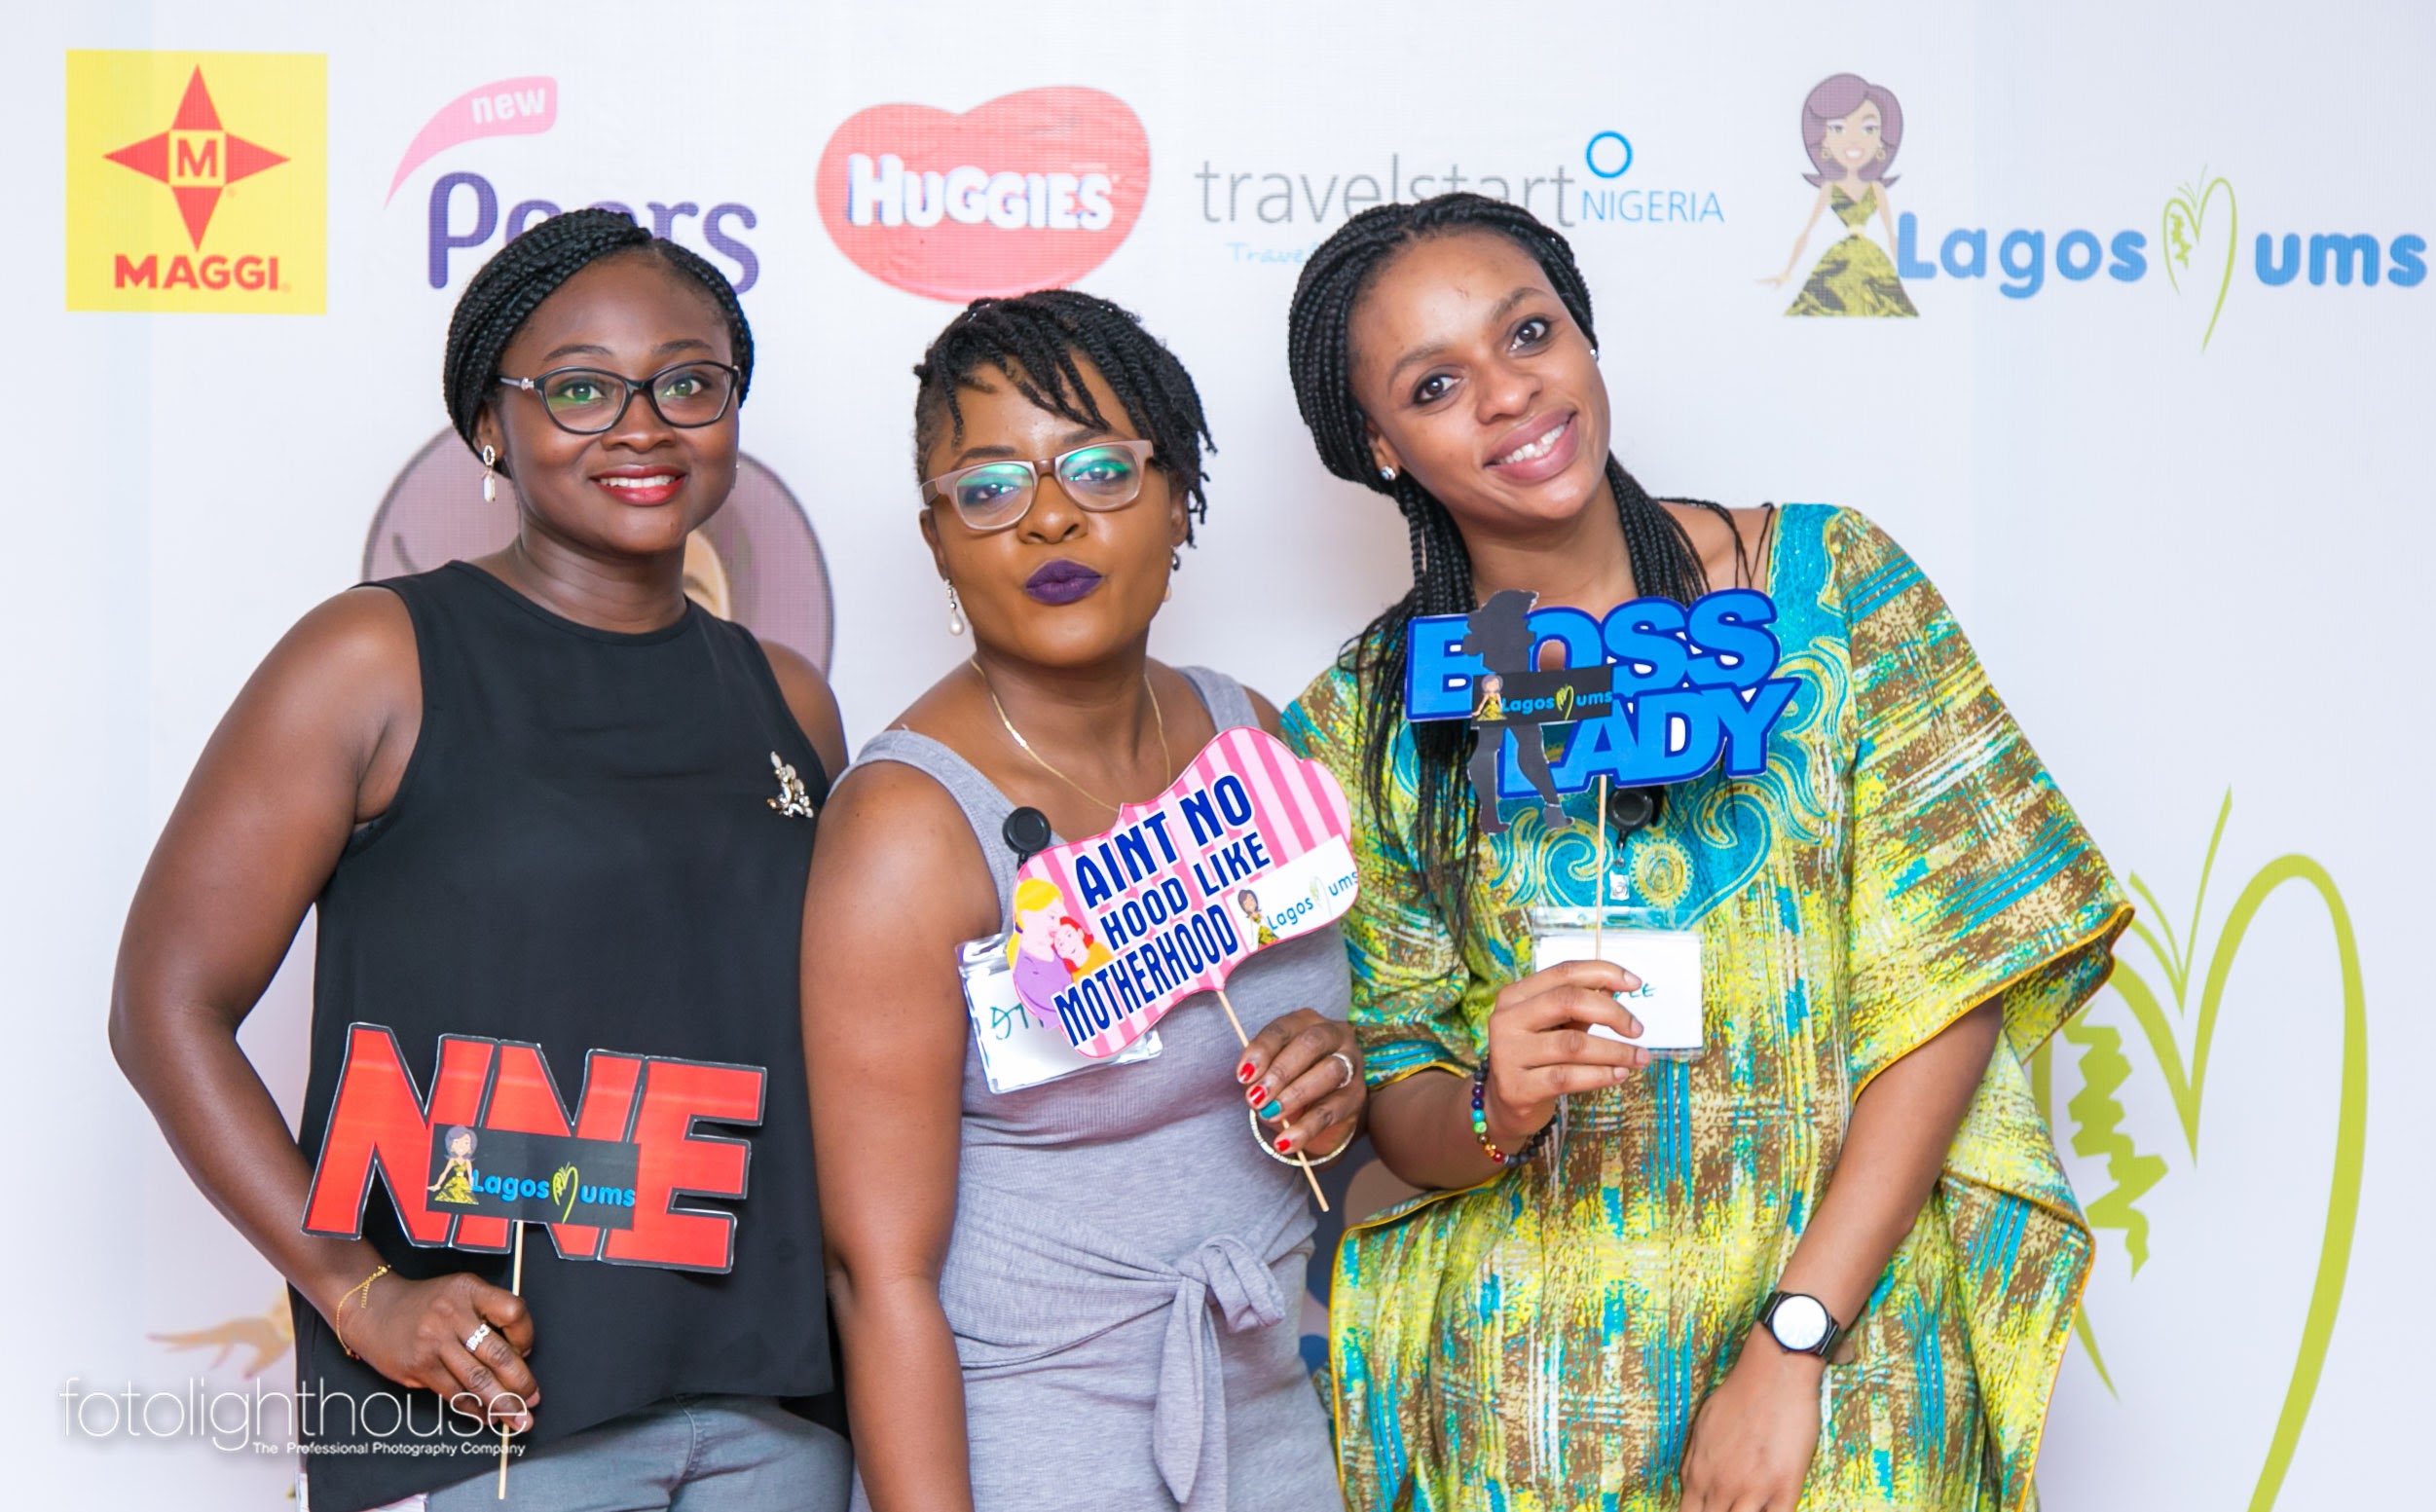 #Throwback To The LagosMums 4th Annual Parenting Conference and Exhibition 2017